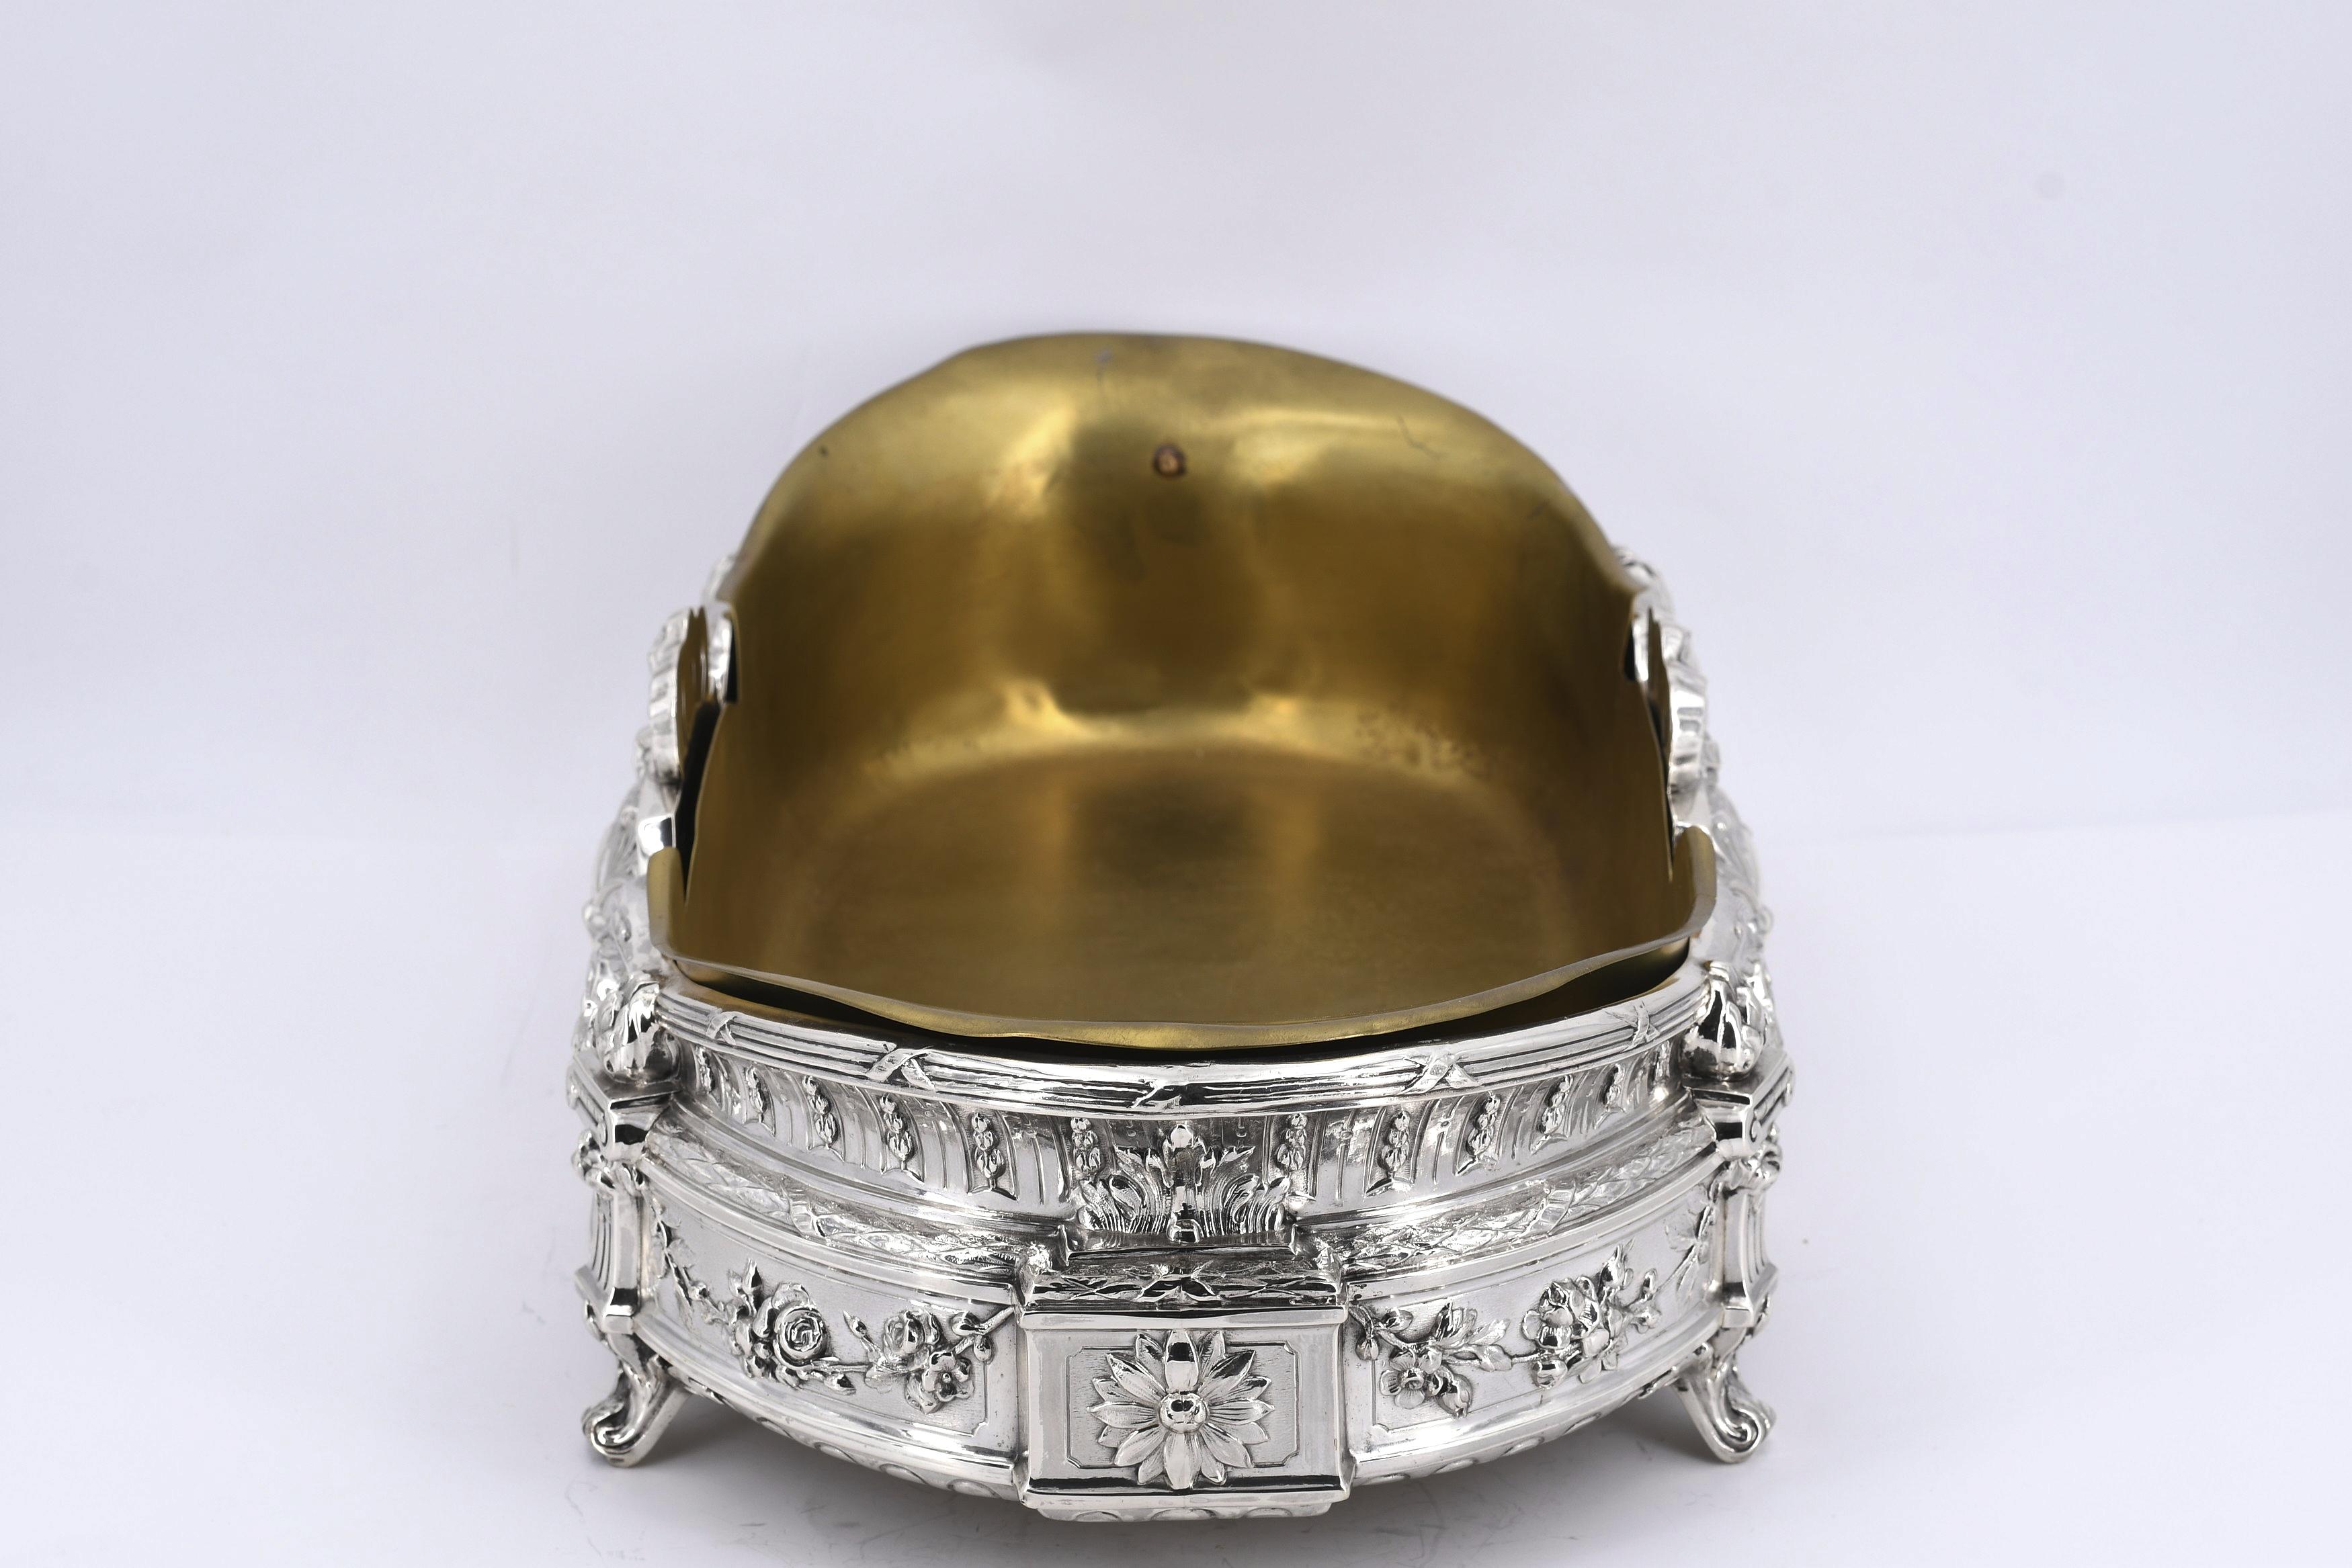 Oval silver jardinière with musical motifs and festoons - Image 3 of 8